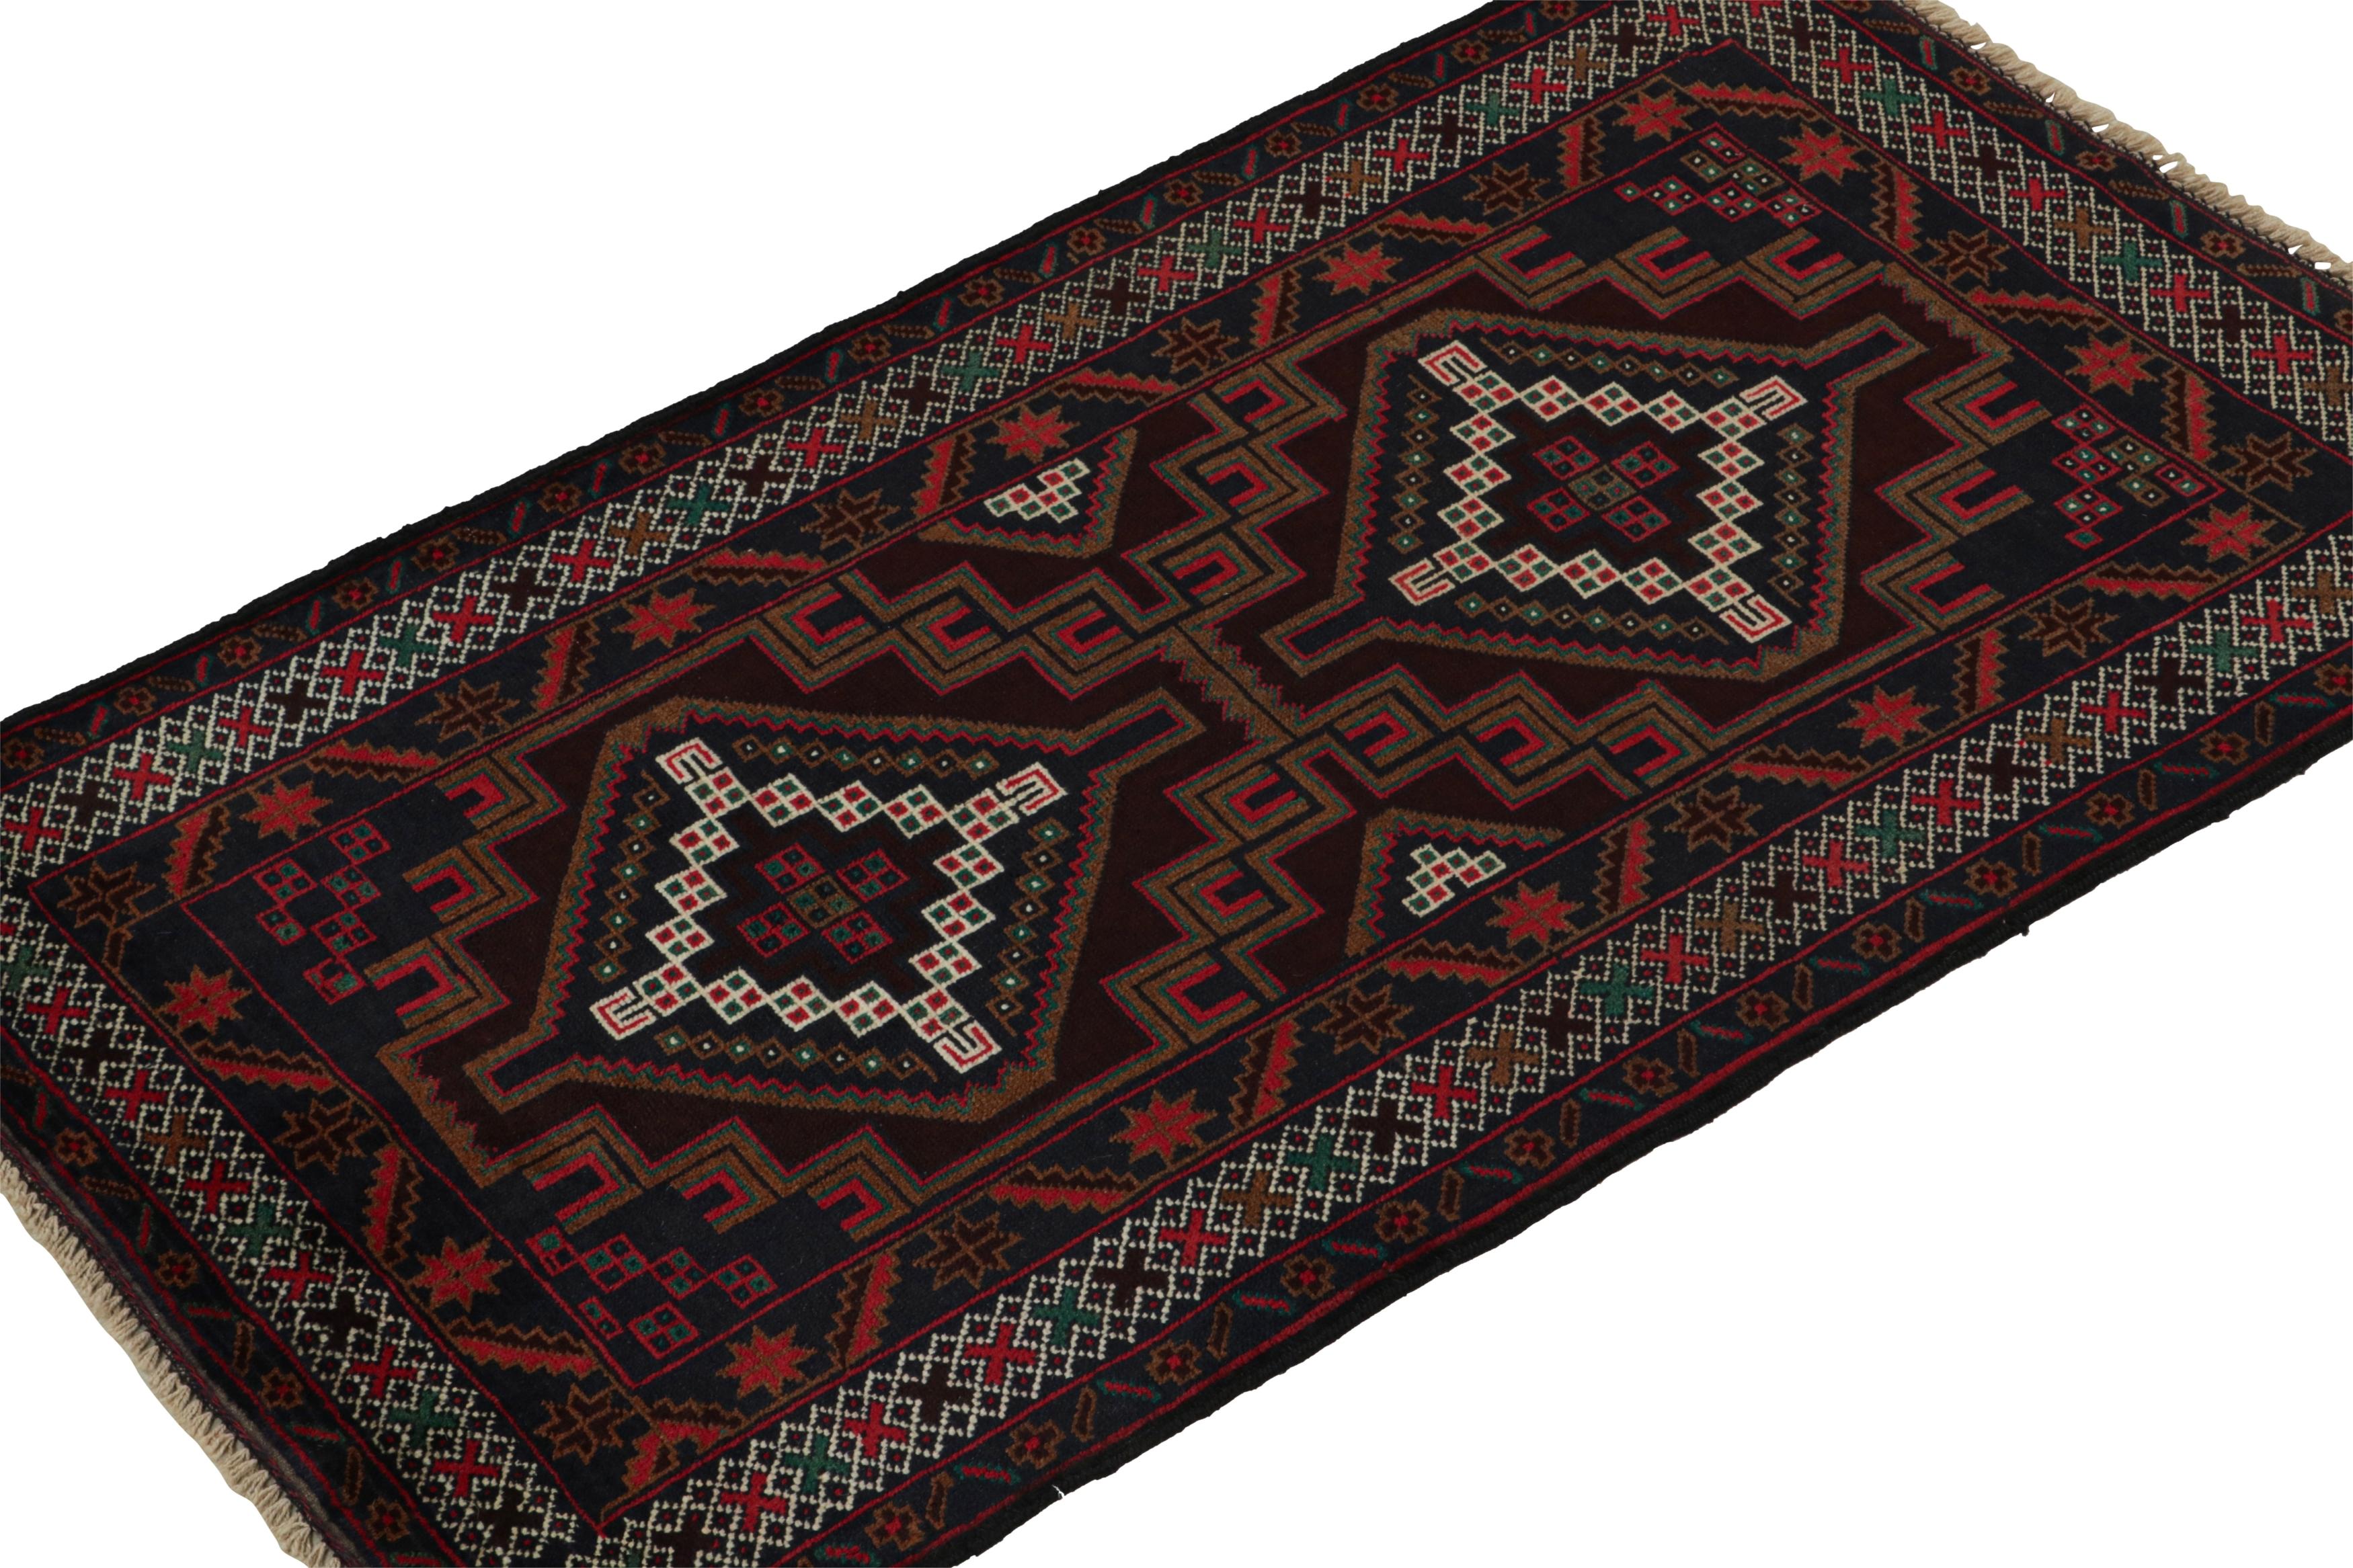 Hand-knotted in wool circa 1950-1960, this 3x5 vintage Baluch Persian rug is a new curation from the Rug & Kilim collection. 

On the Design: 

This tribal runner enjoys medallions and geometric patterns in rich red, midnight blue and brown tones.